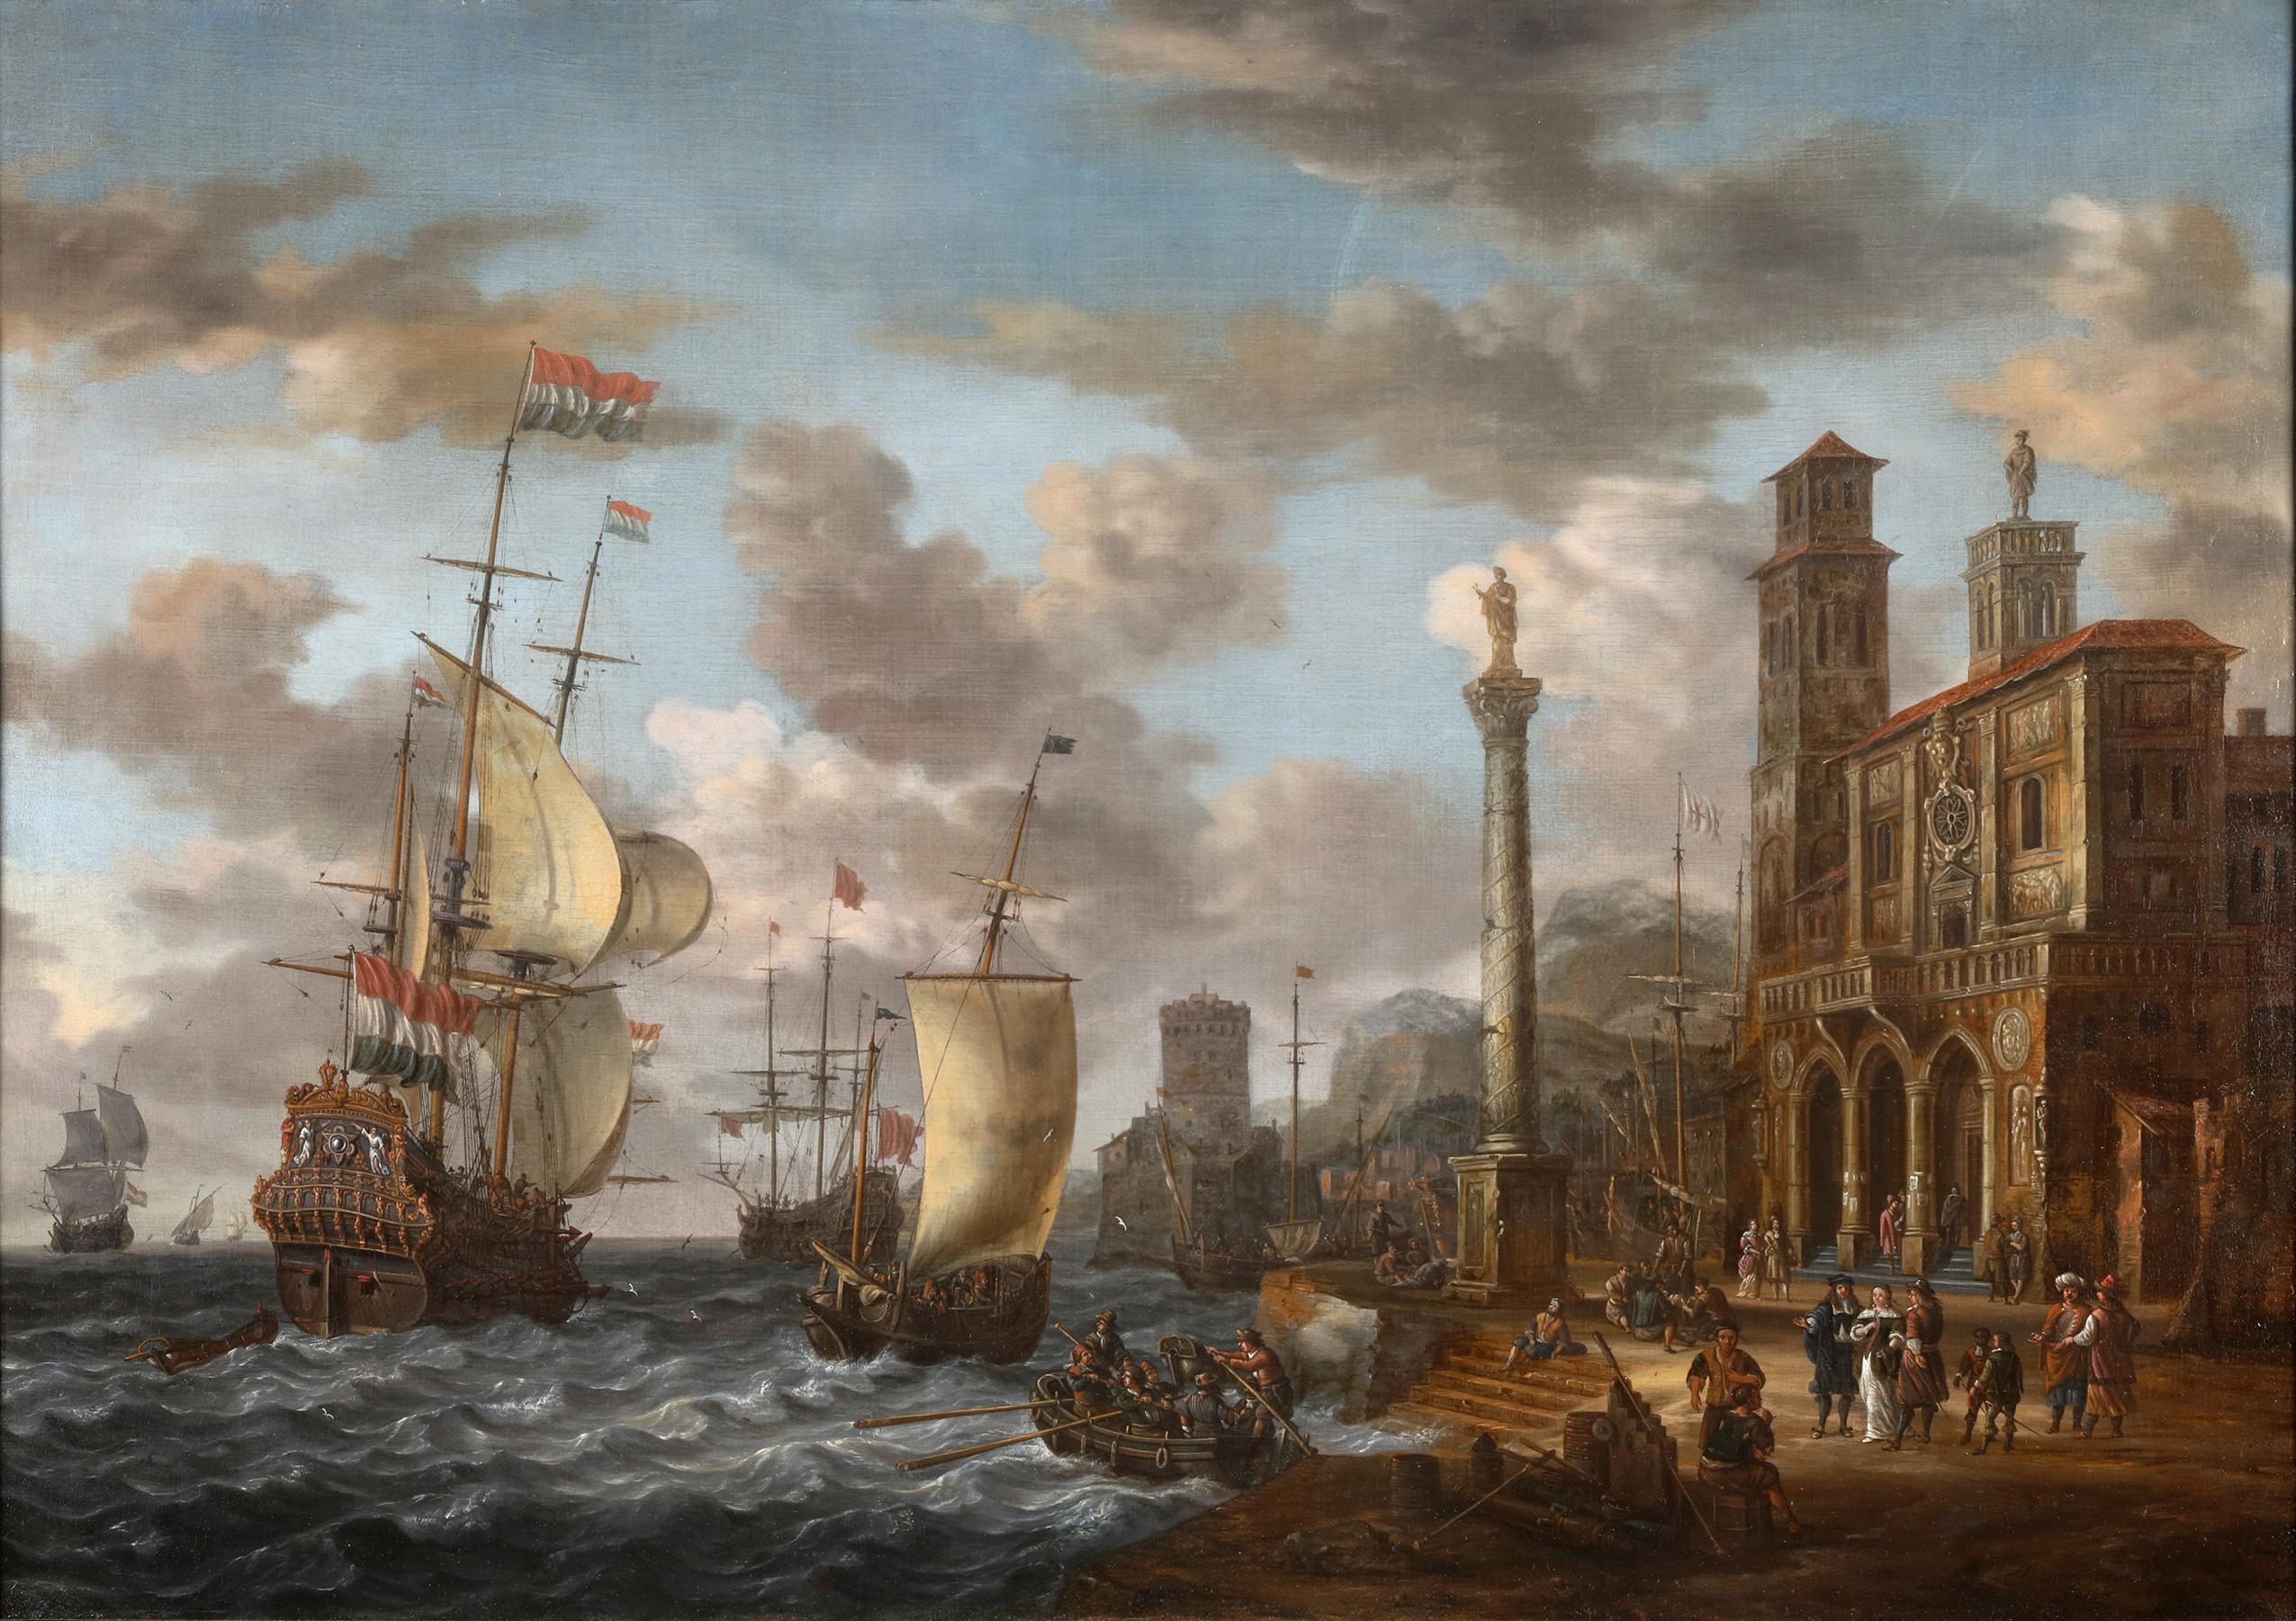 Oil on canvas
 Signed lower right: “Johannes van Sturckenburgh,”

Johannes Sturckenburgh’s “View of an Animated Italiante harbour,” is a piece that transports viewers to a picturesque and bustling Mediterranean coastal scene.  This scene shows a